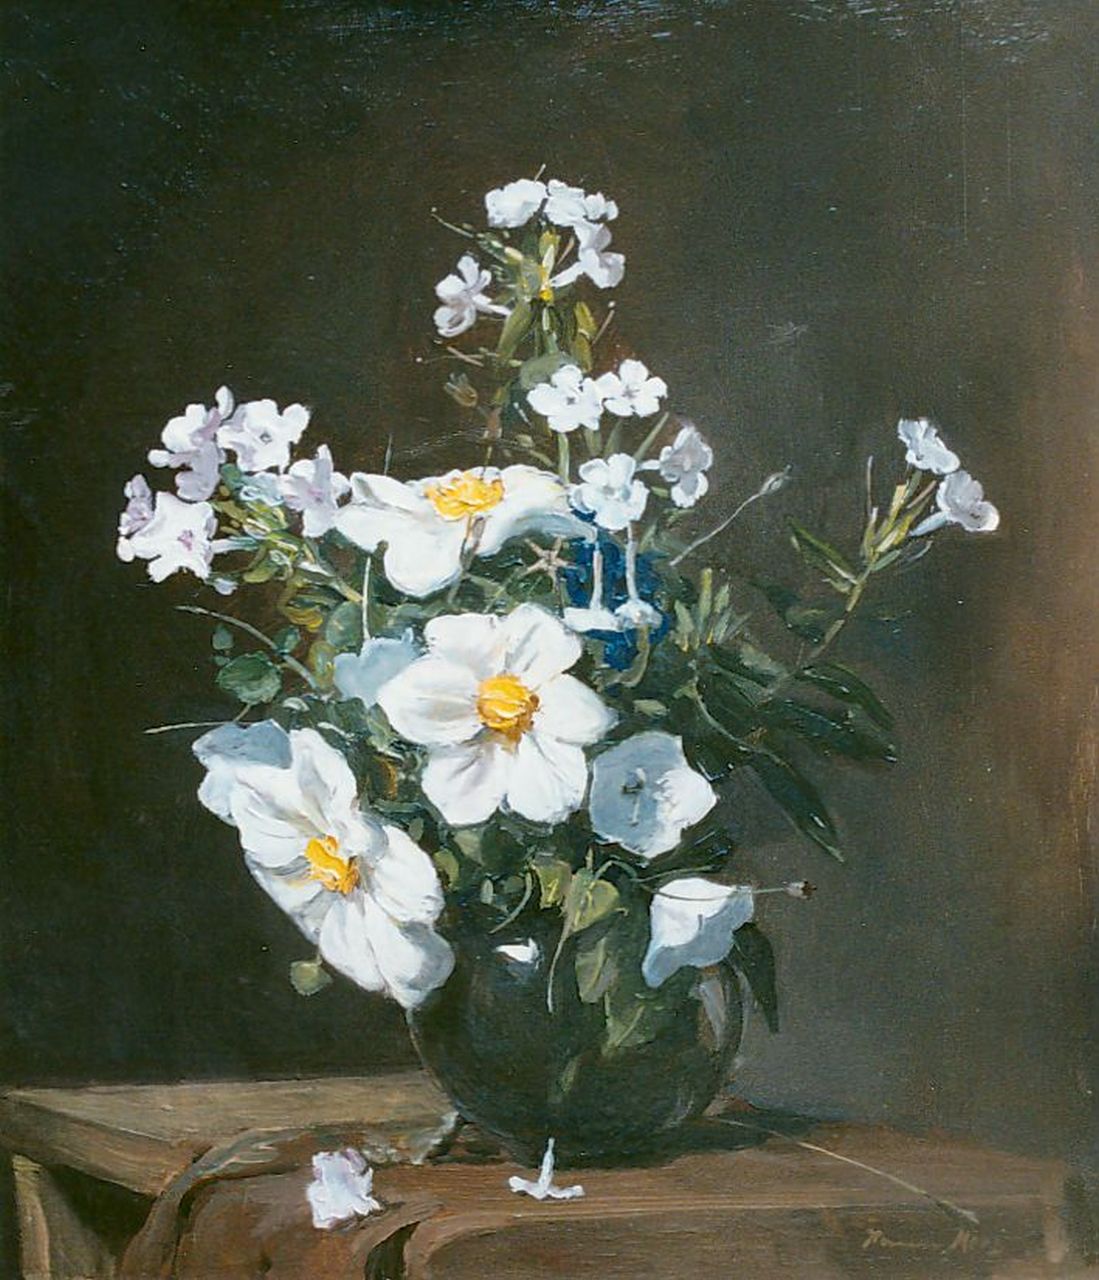 Mees M.A.  | Margaretha Agatha Mees, A flower still life with daisies and poppies, Öl auf Leinwand 44,2 x 38,7 cm, signed l.r.